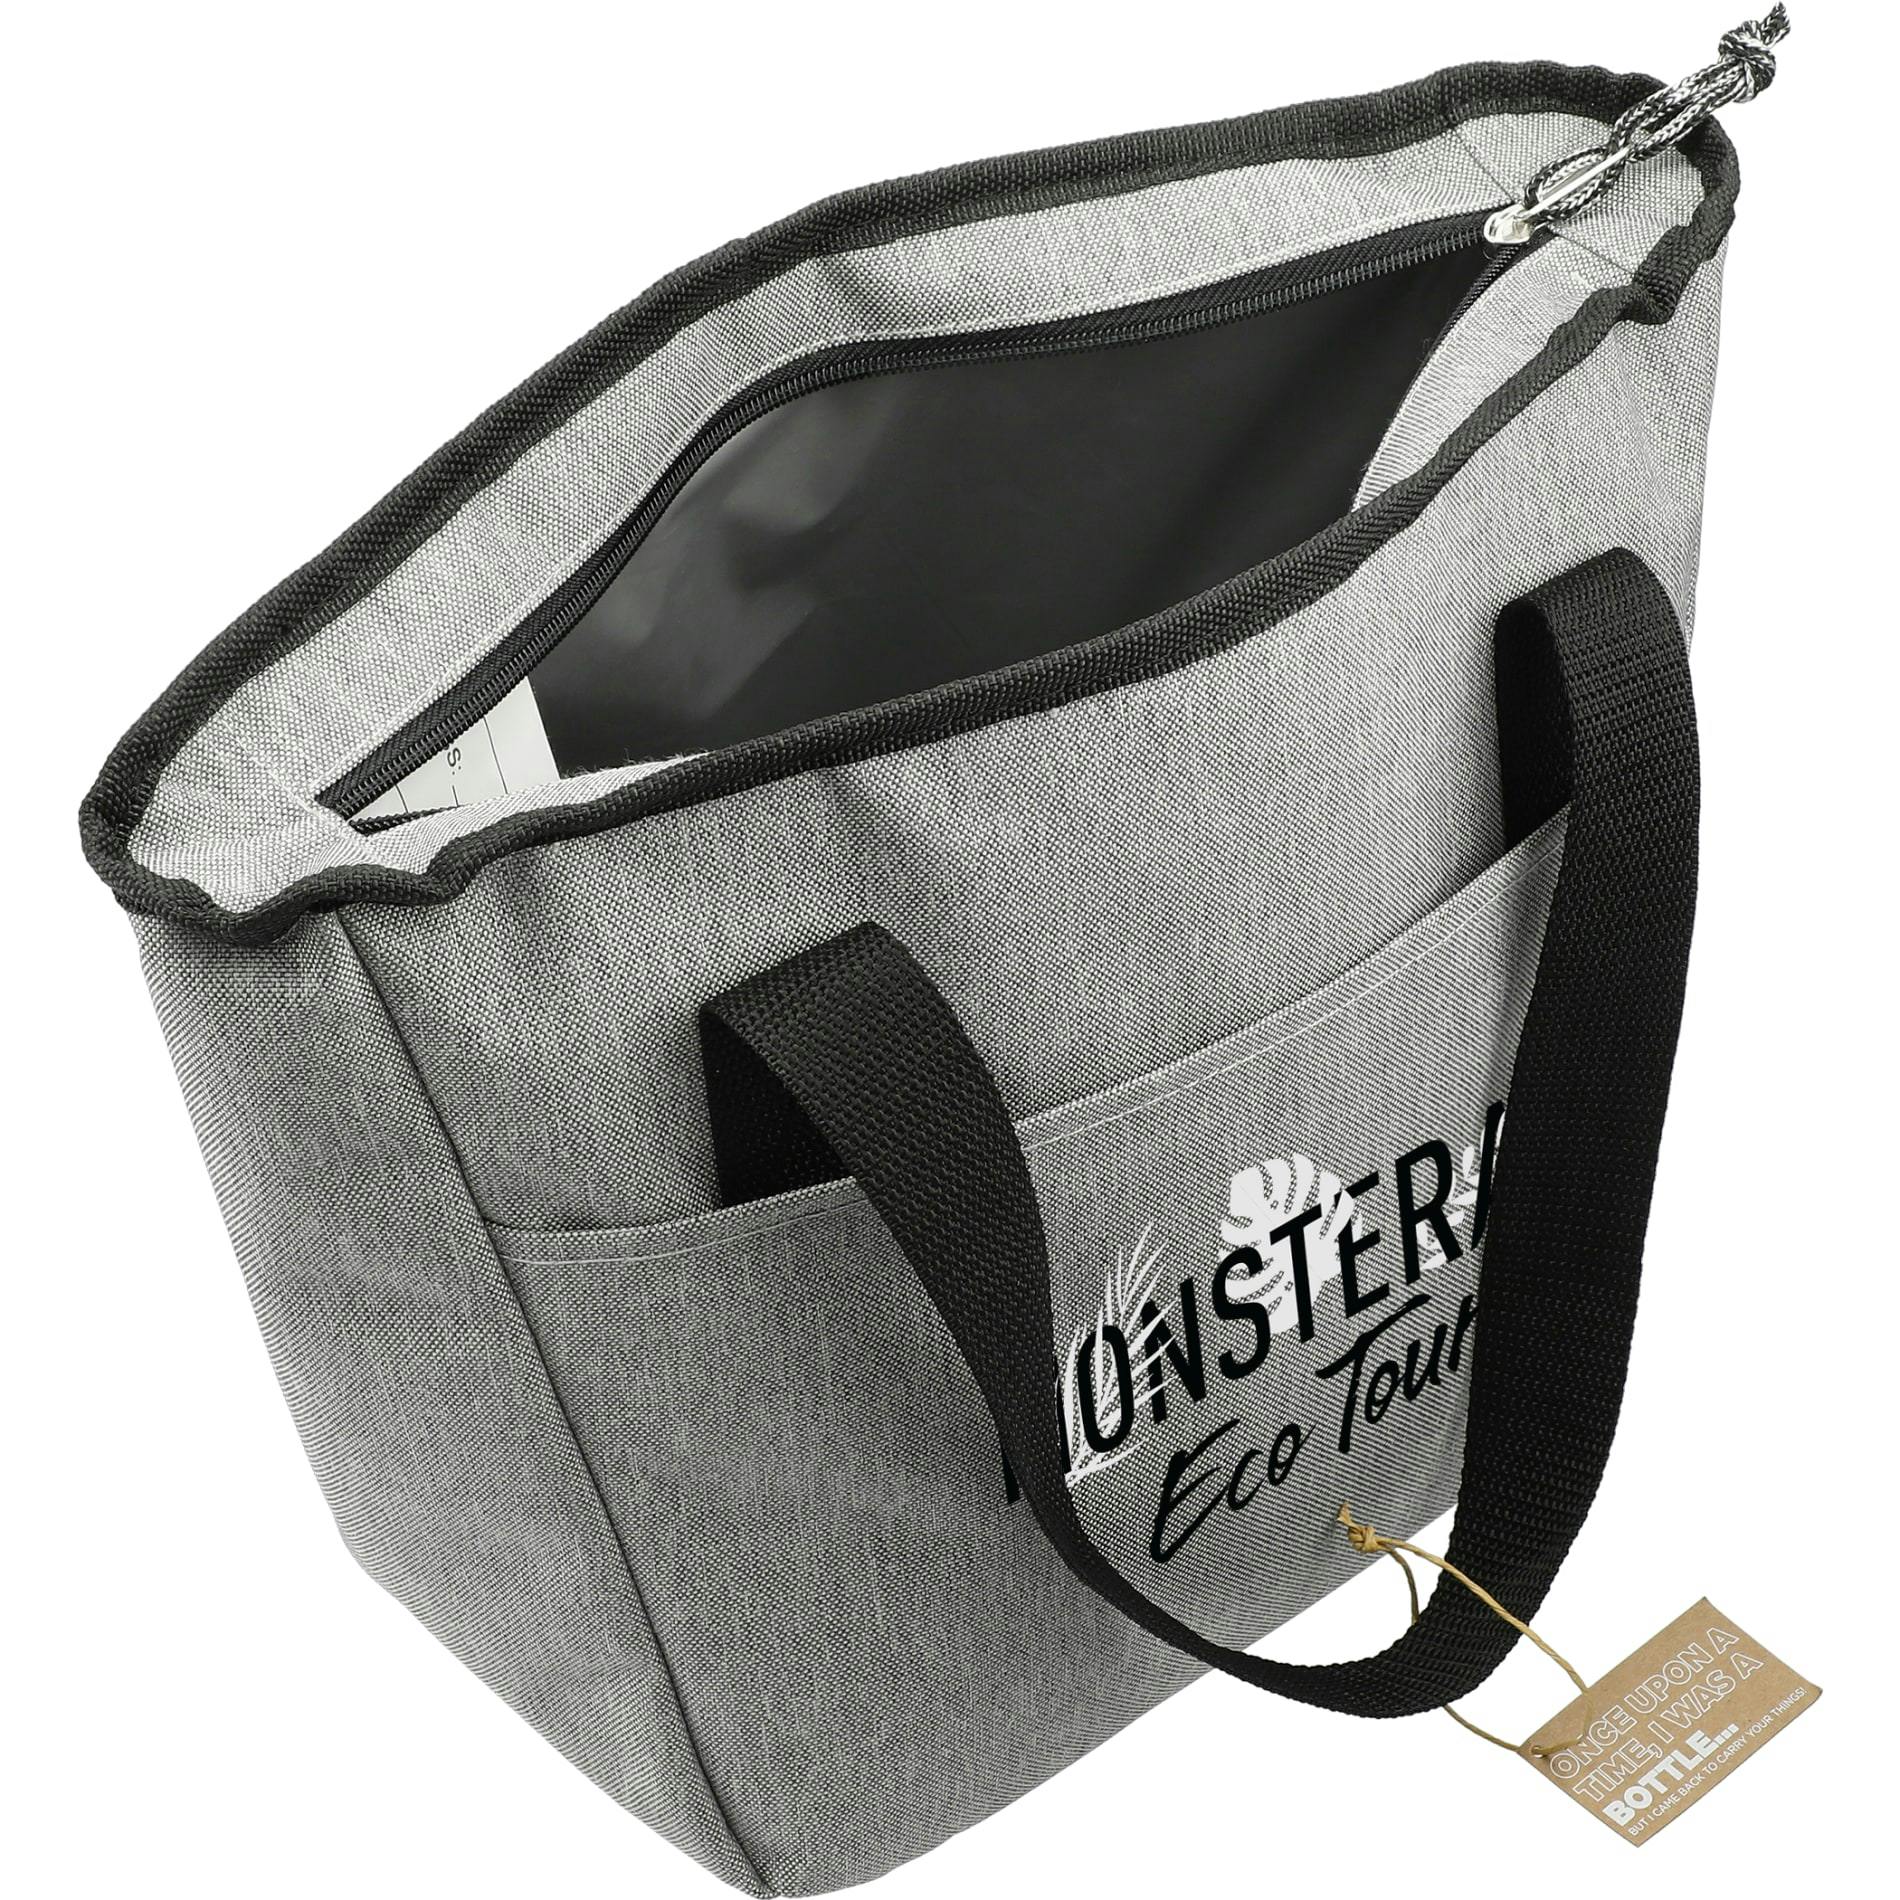 Merchant & Craft Revive Recycled 9 Can Tote Cooler - additional Image 5